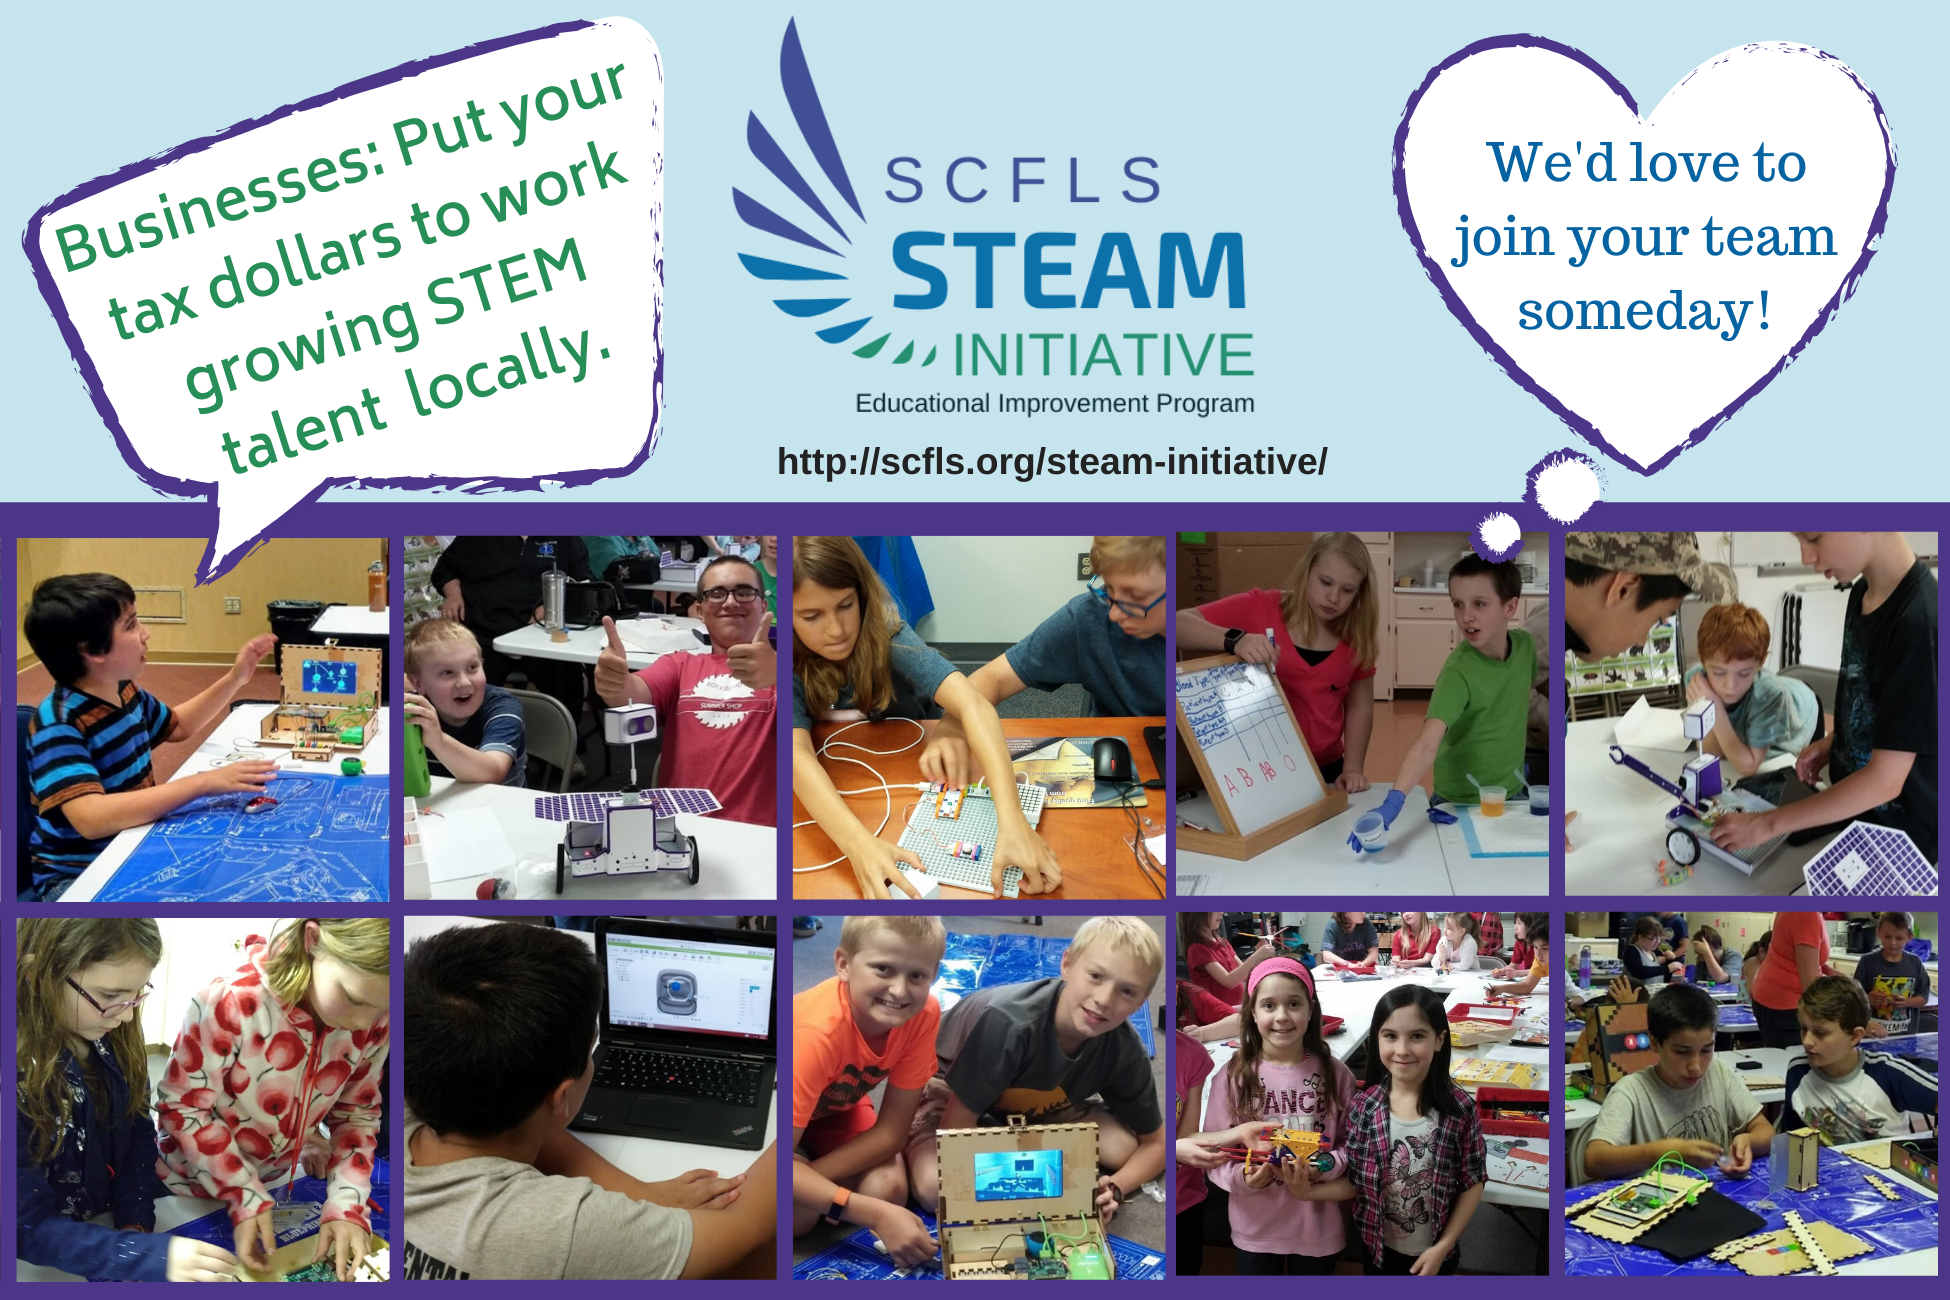 Info about SCFLS STEAM Initiative being eligible for donations through Educational Improvement Tax Credit Program